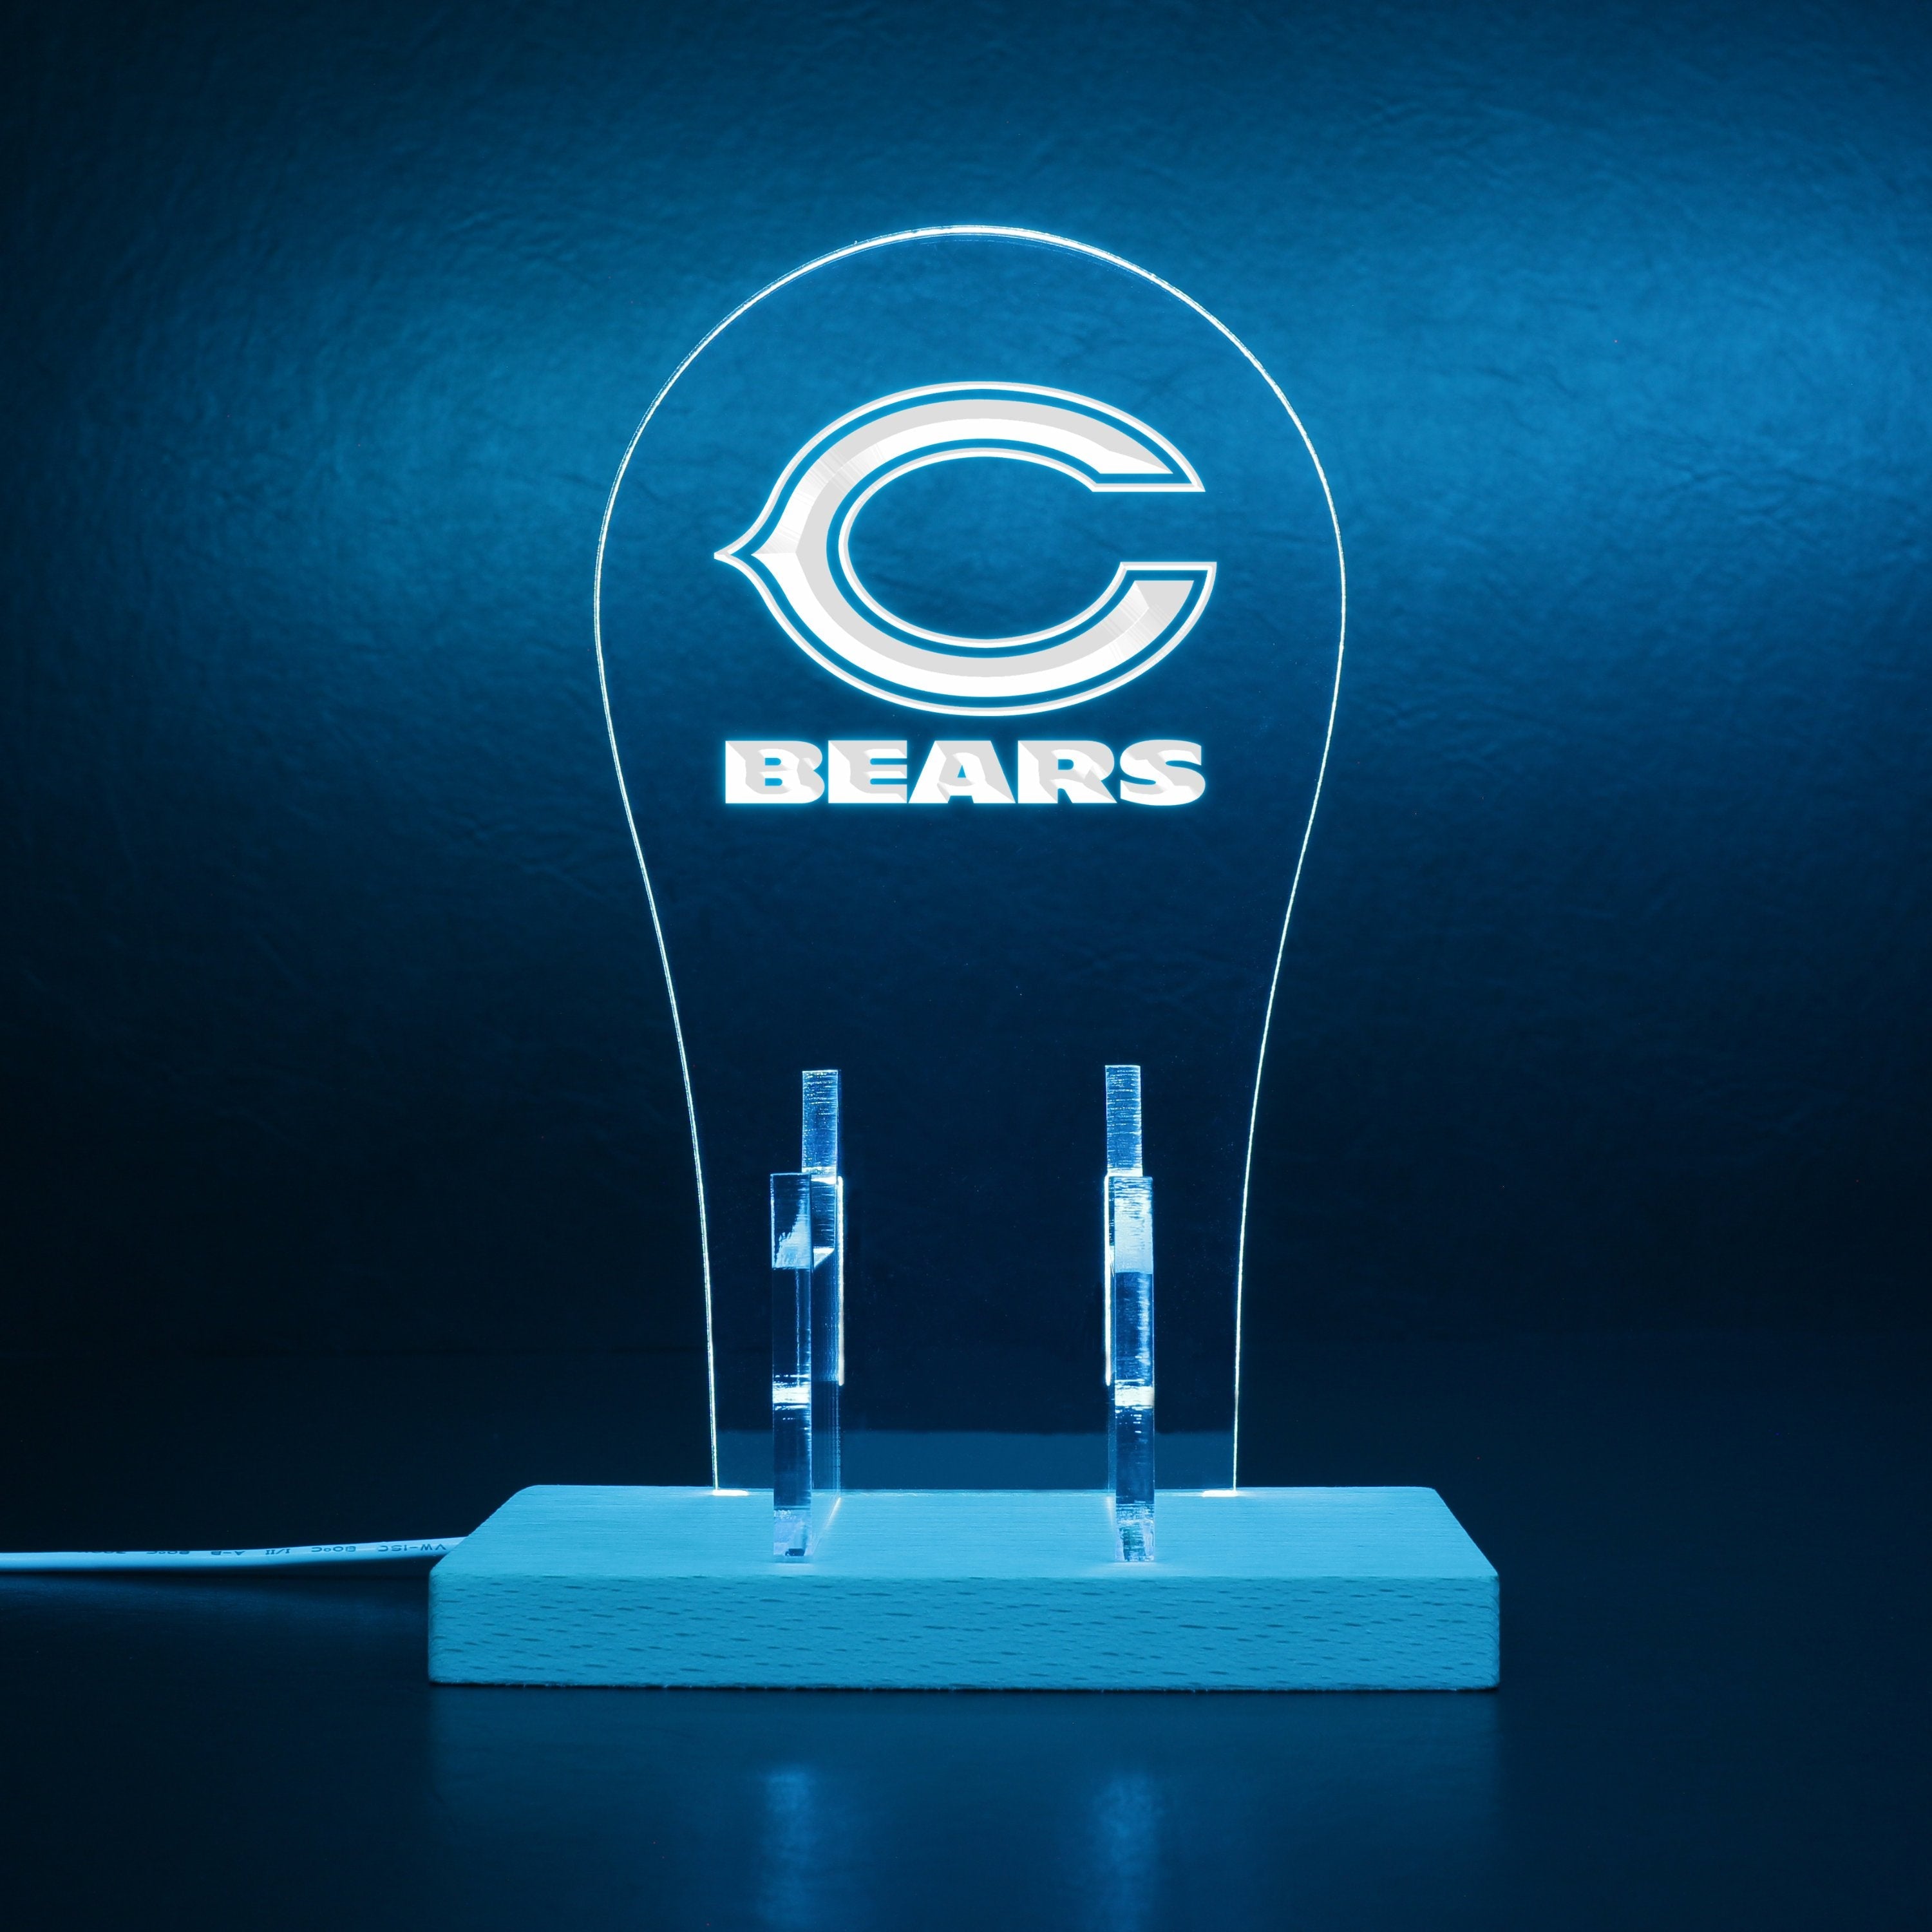 Chicago Bears Super Bowl LED Gaming Headset Controller Stand